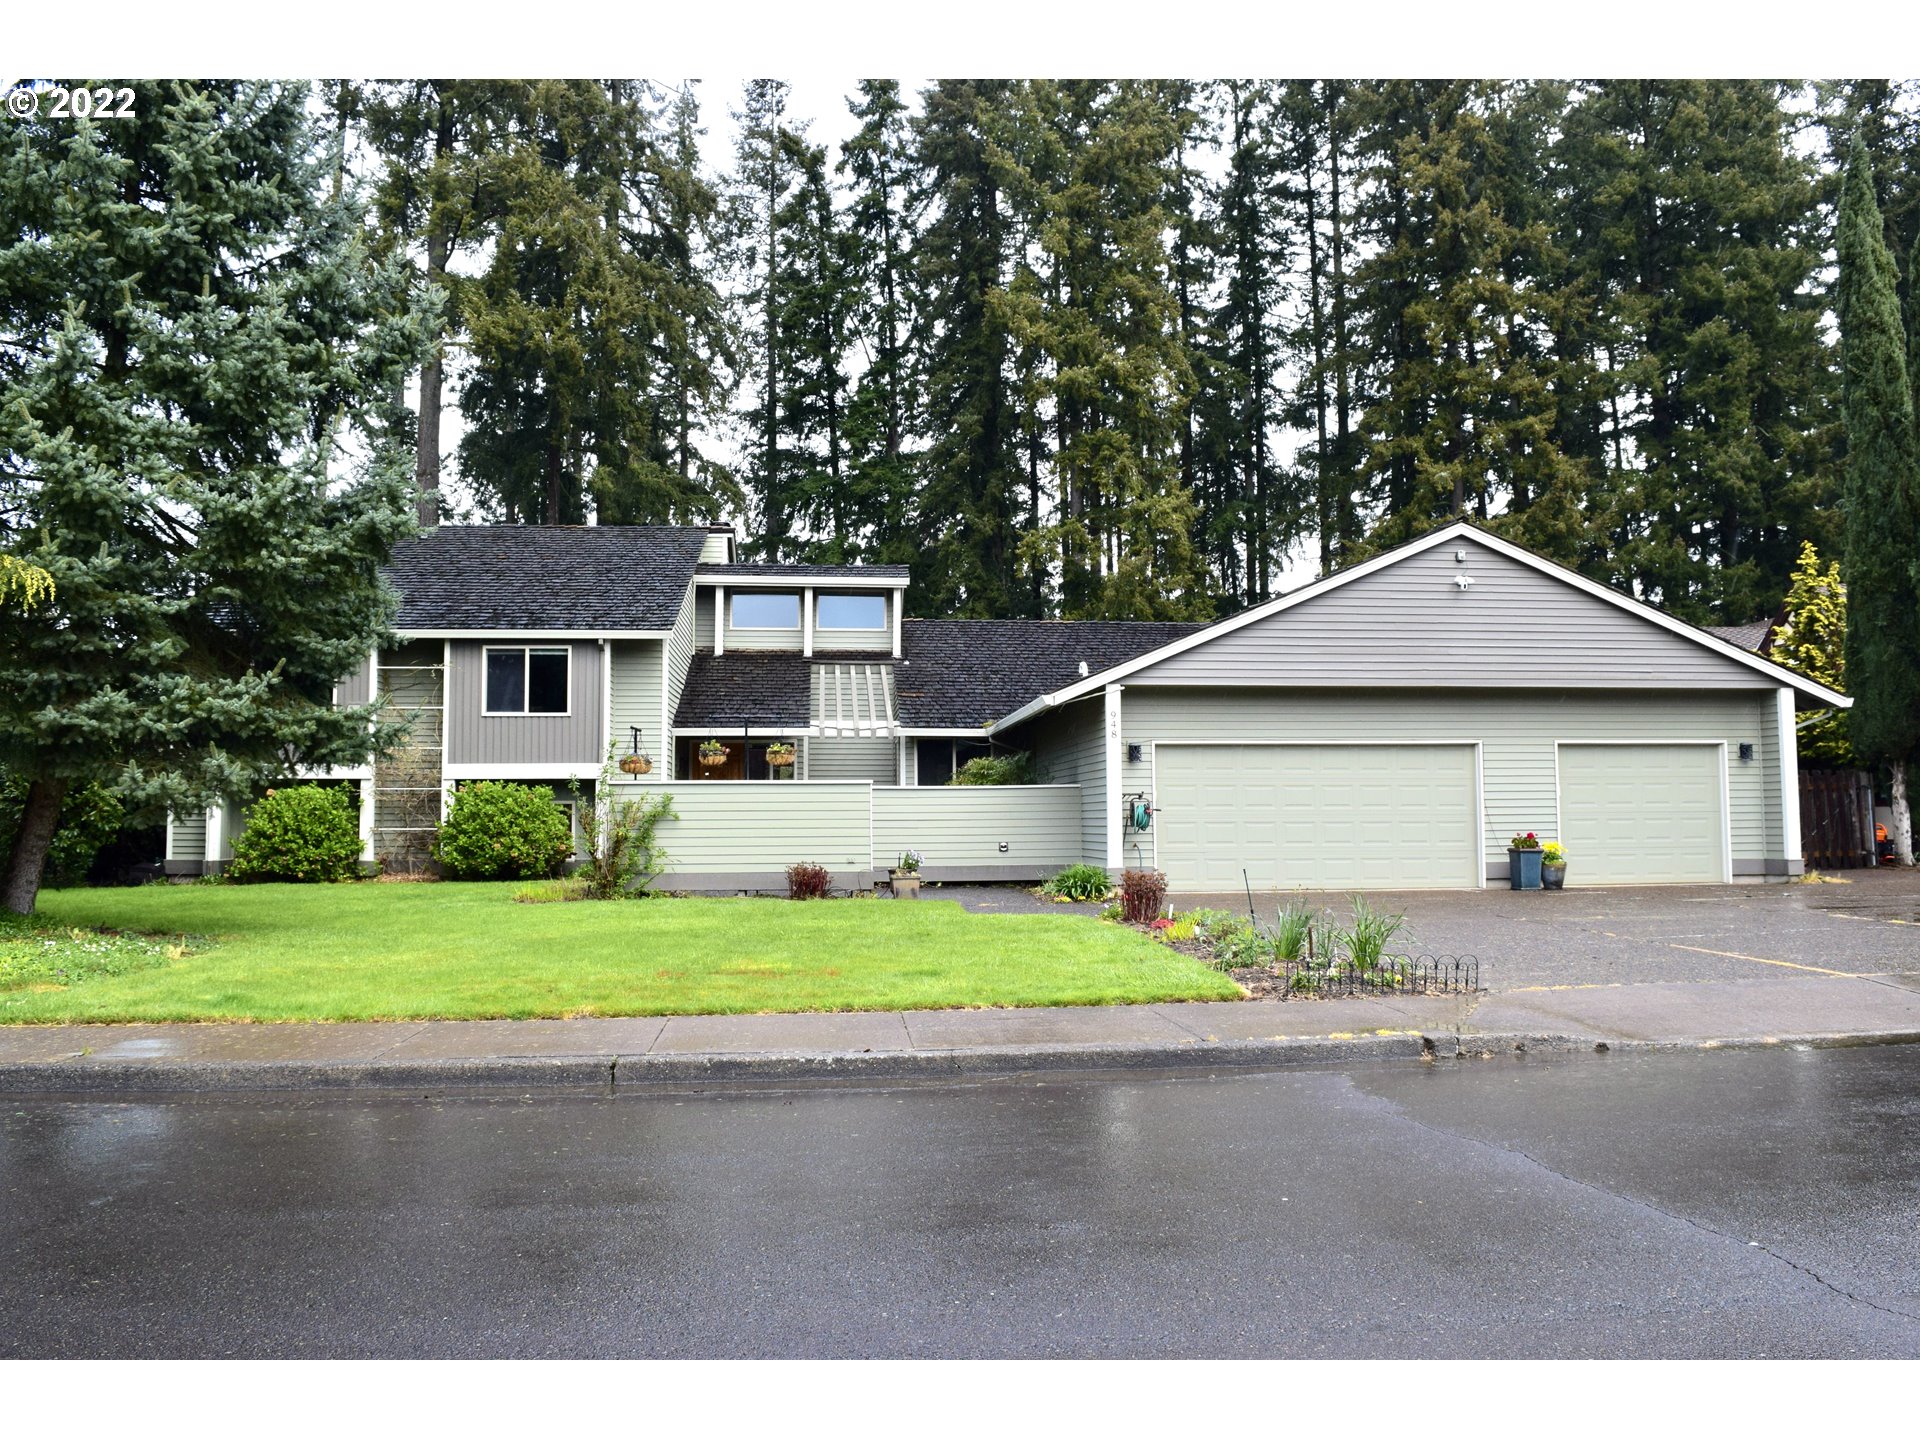 948 NW 170TH DR, Beaverton, OR 97006